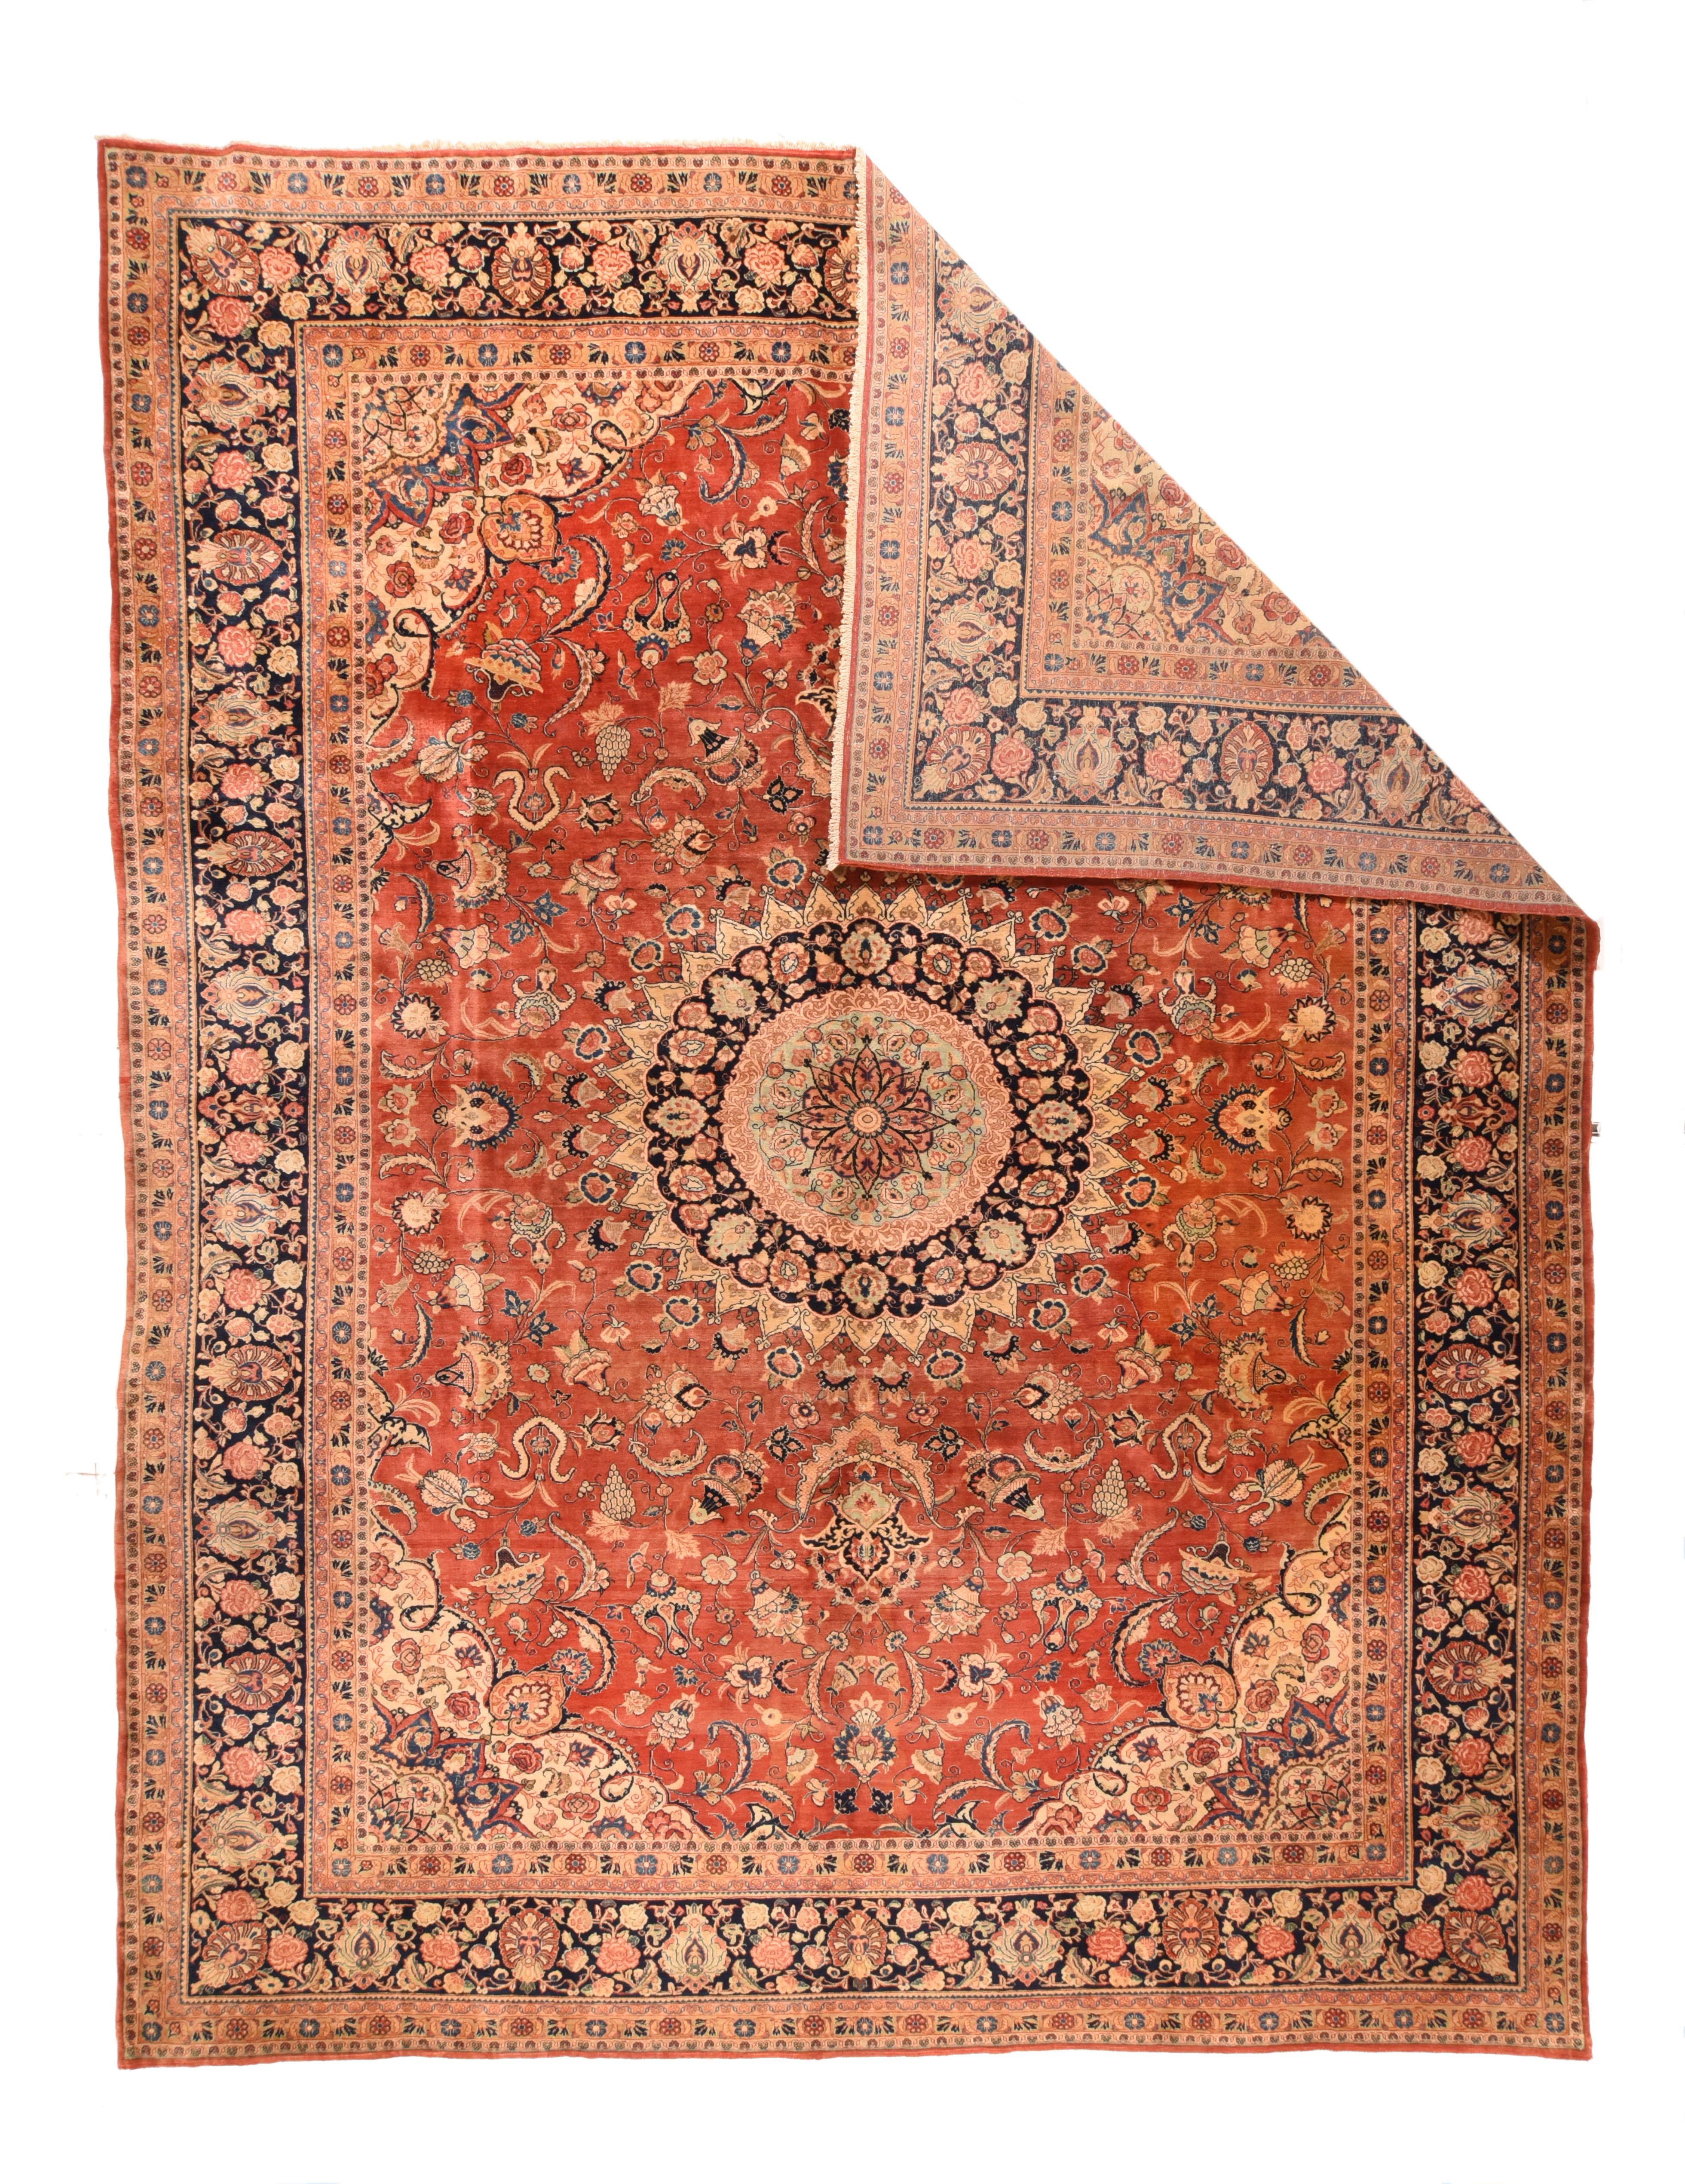 Although recent, this handsome west Persian village carpet shows antique traits in the 32 point, round nested near black medallion with palmette pendants; the warm red field with leaves, palmettes and cloud band blossoms. Ecru and near black